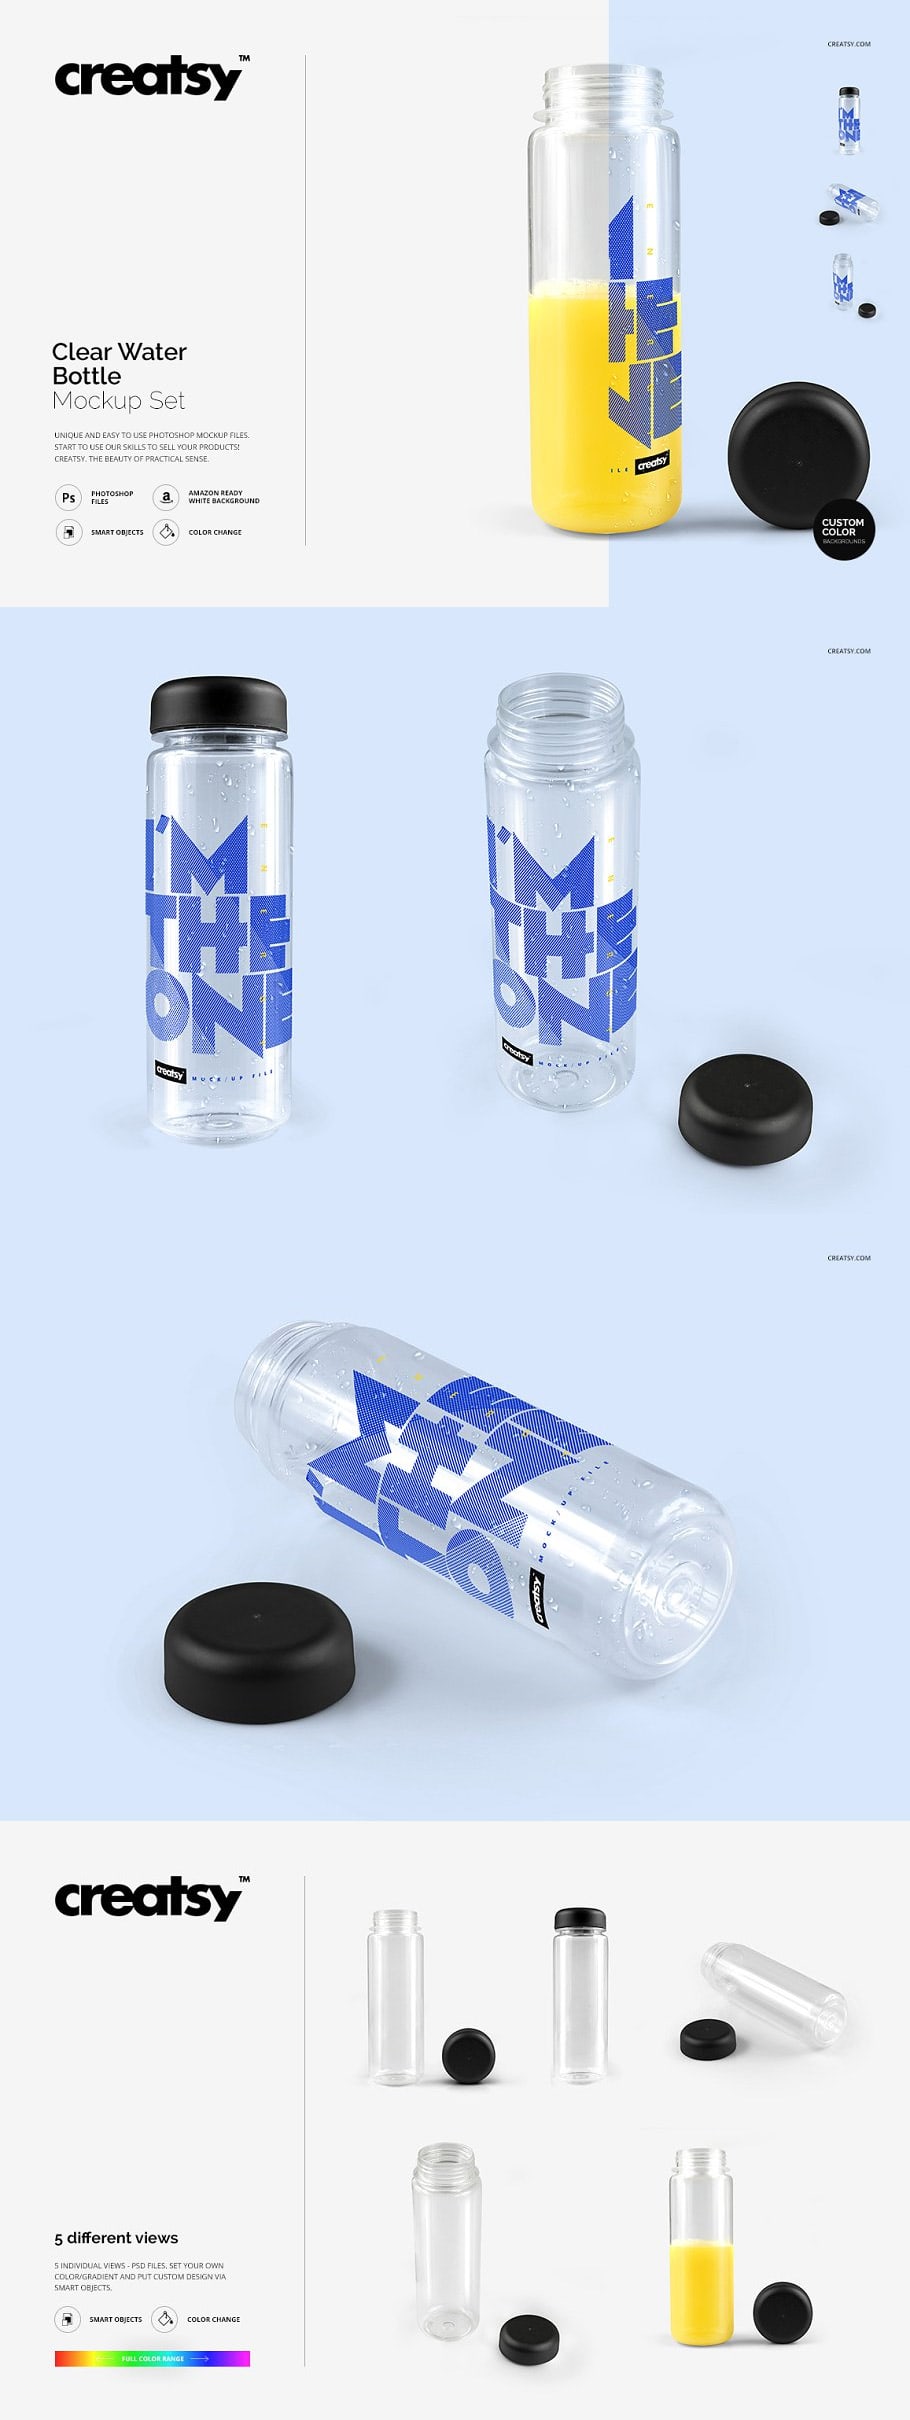 Clear Water Bottle Mockup Set - Find the Perfect Creative Mockups